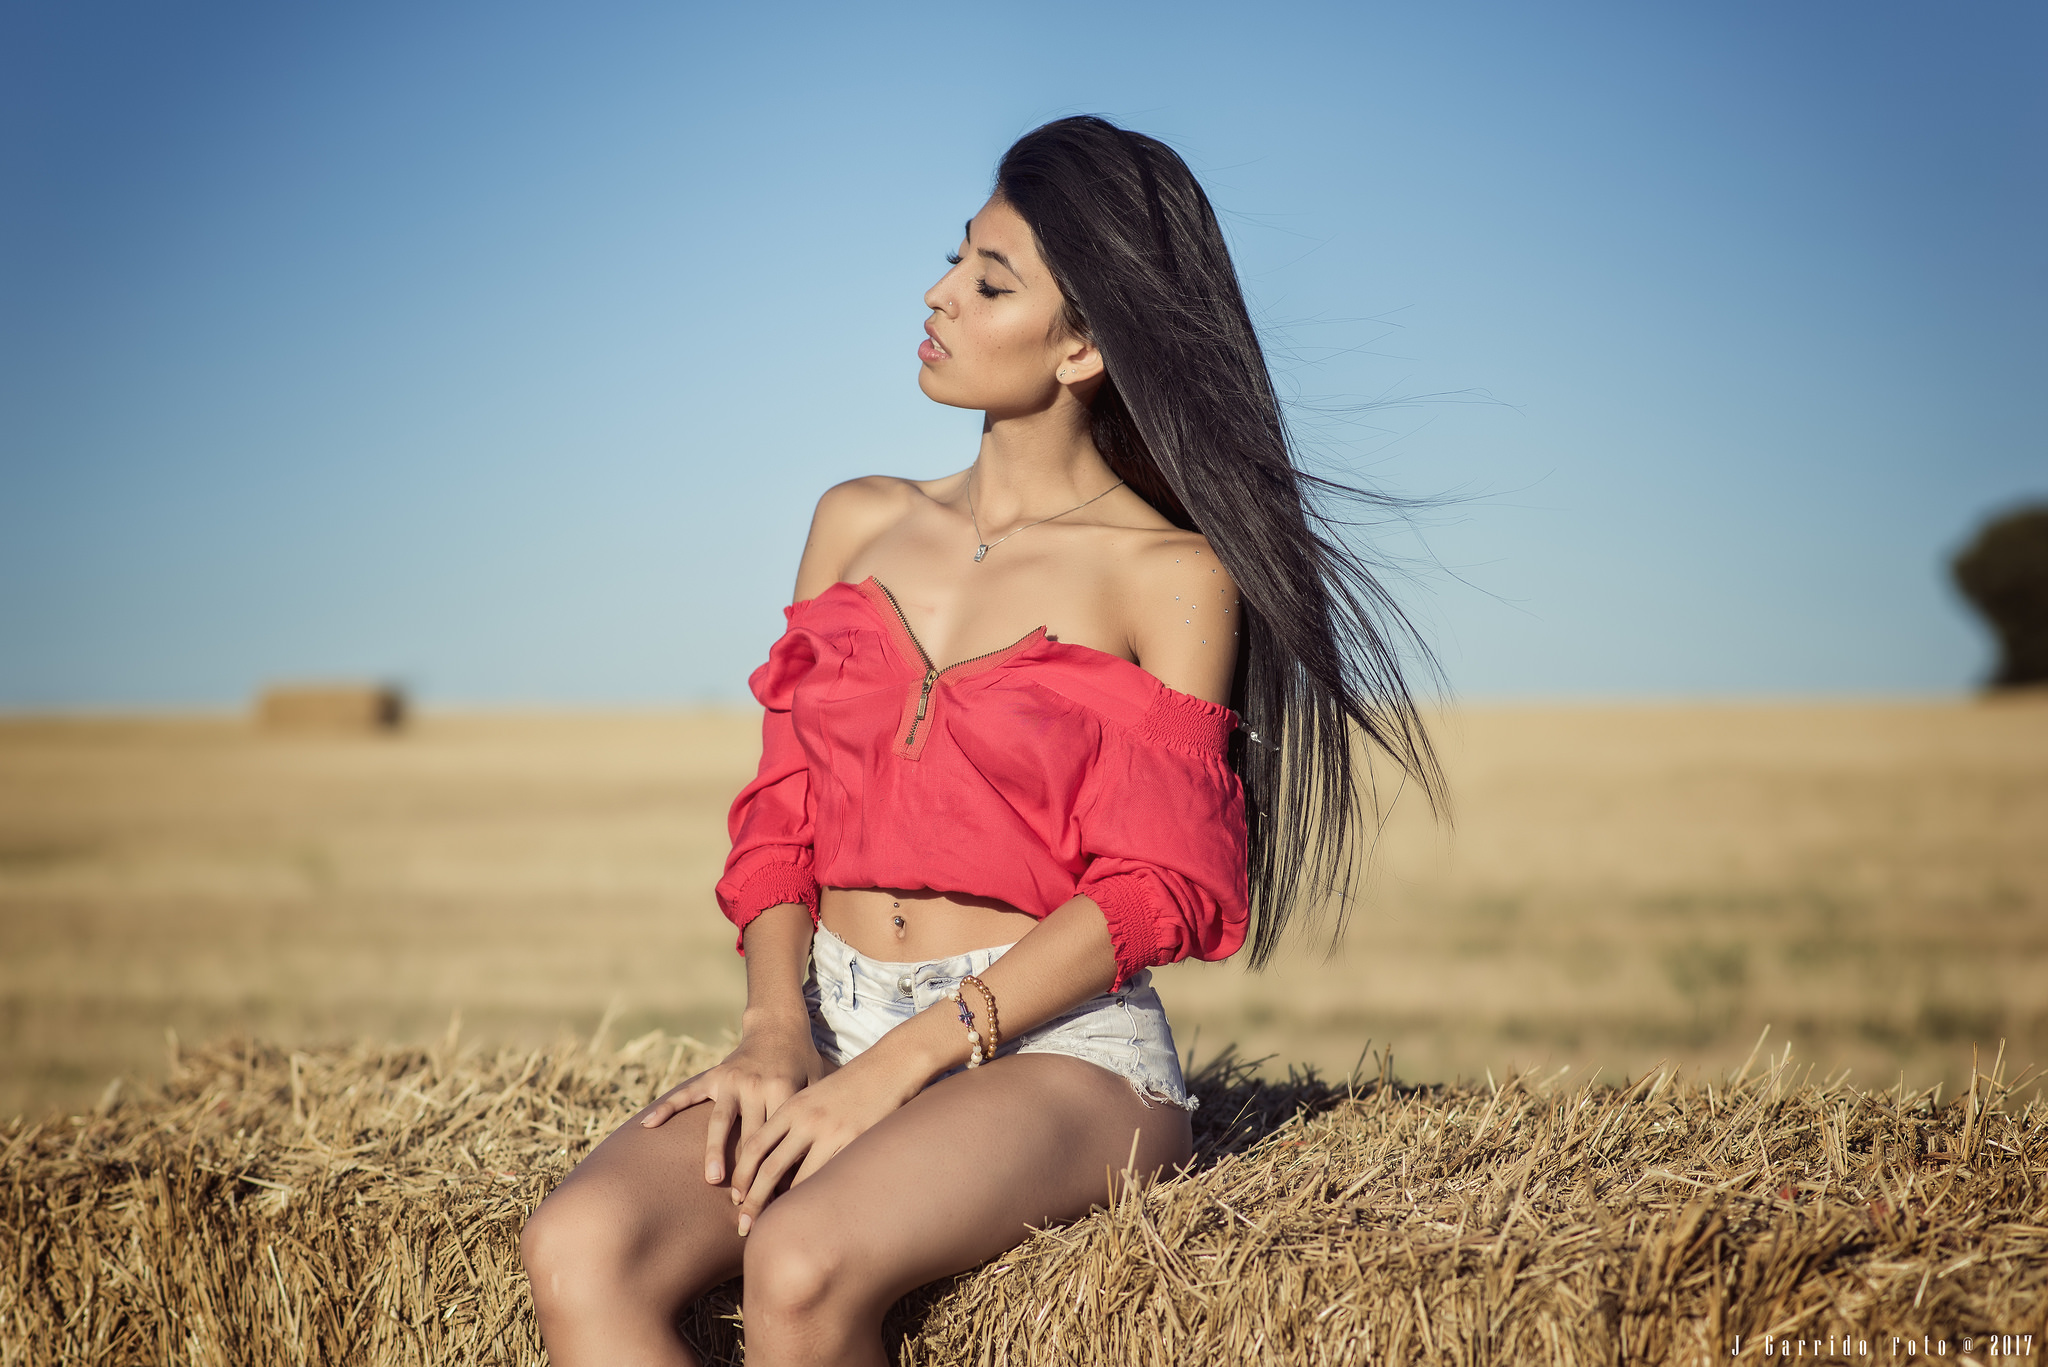 People 2048x1367 women jean shorts sitting women outdoors sky tanned belly pierced navel necklace bare shoulders hay long hair